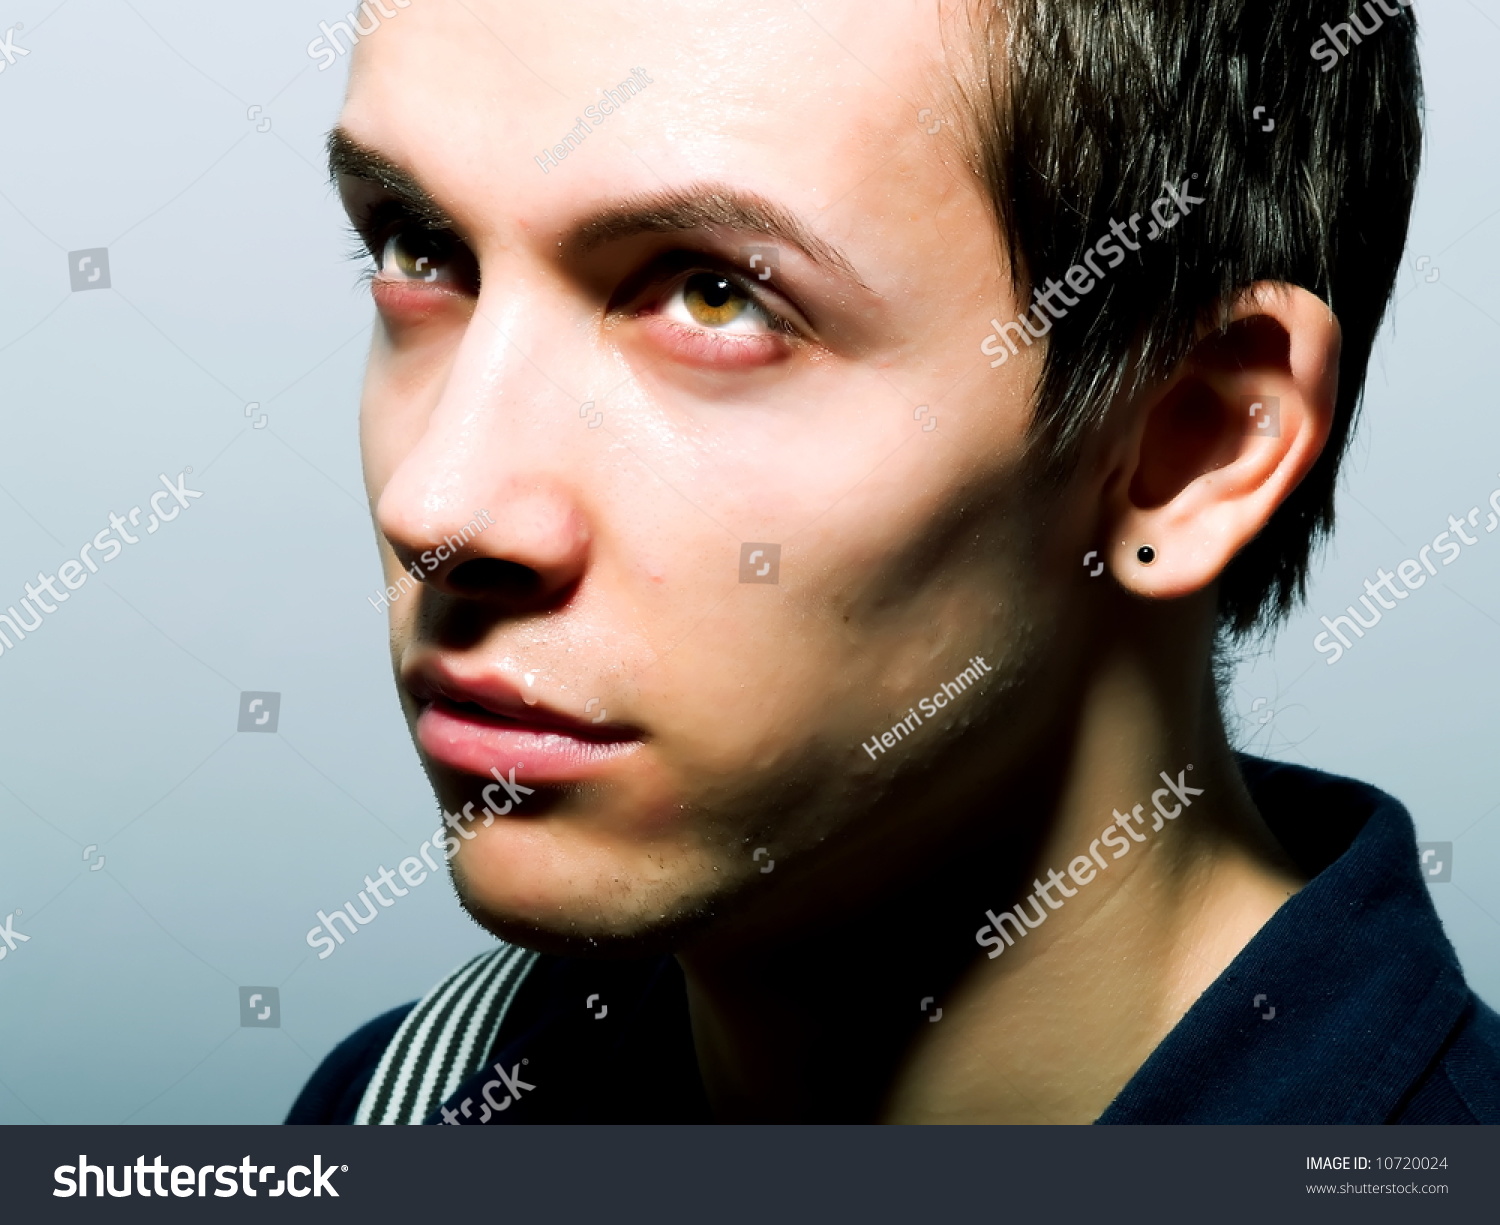 Portrait Of An Attractive Young Man Stock Photo 10720024 : Shutterstock